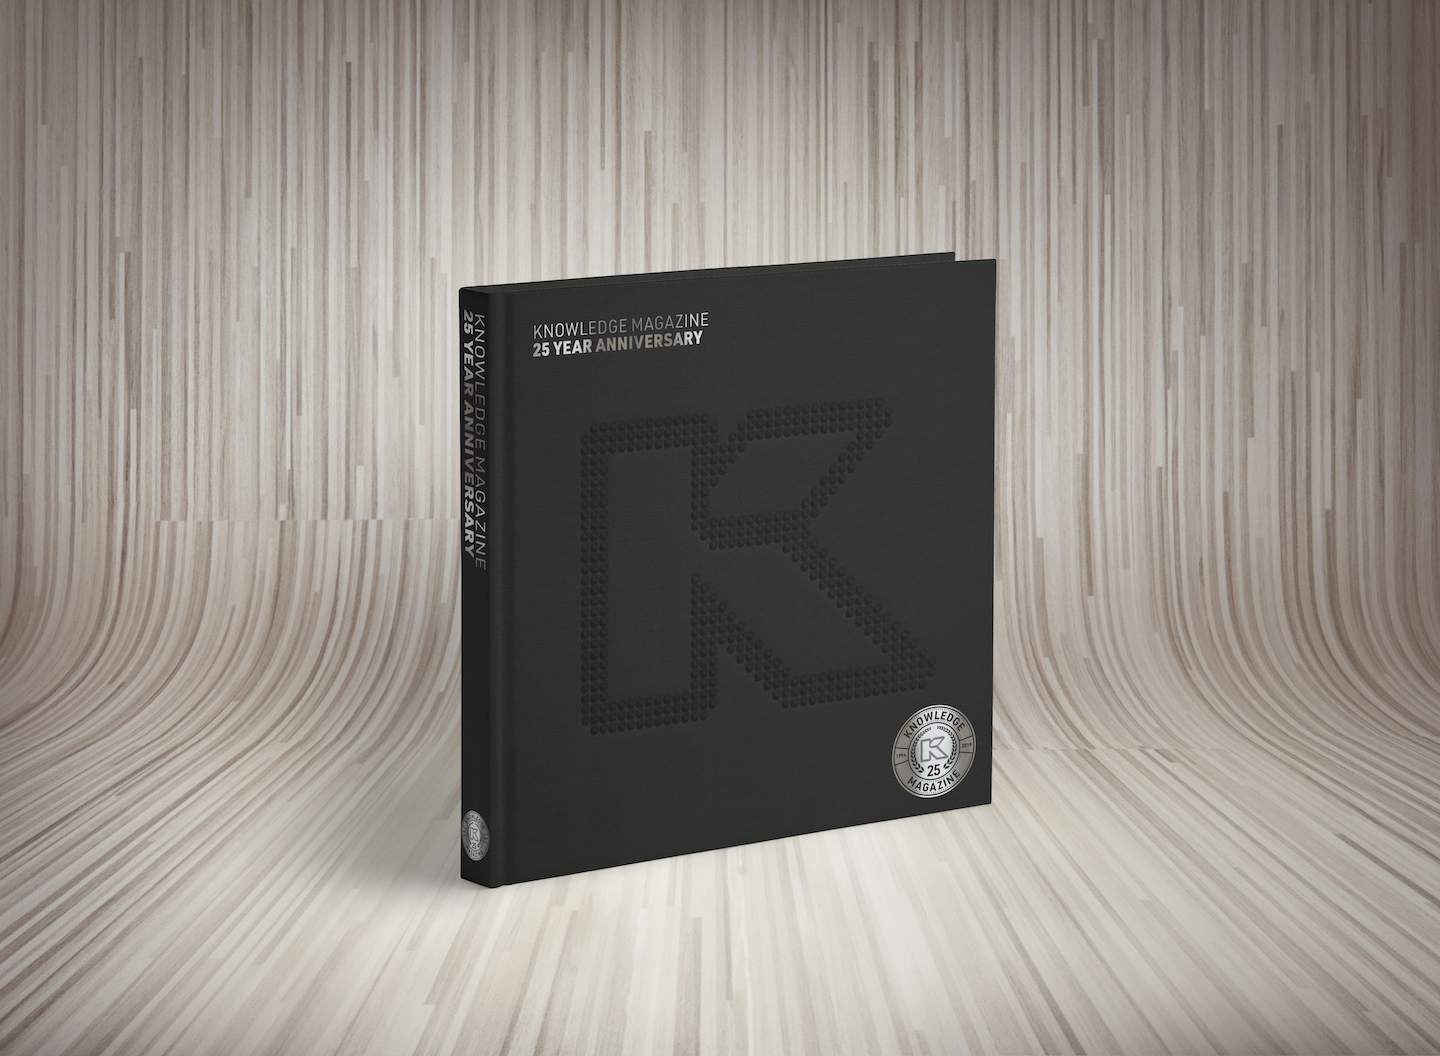 Drum & bass magazine Knowledge celebrates 25 years with limited-edition book image